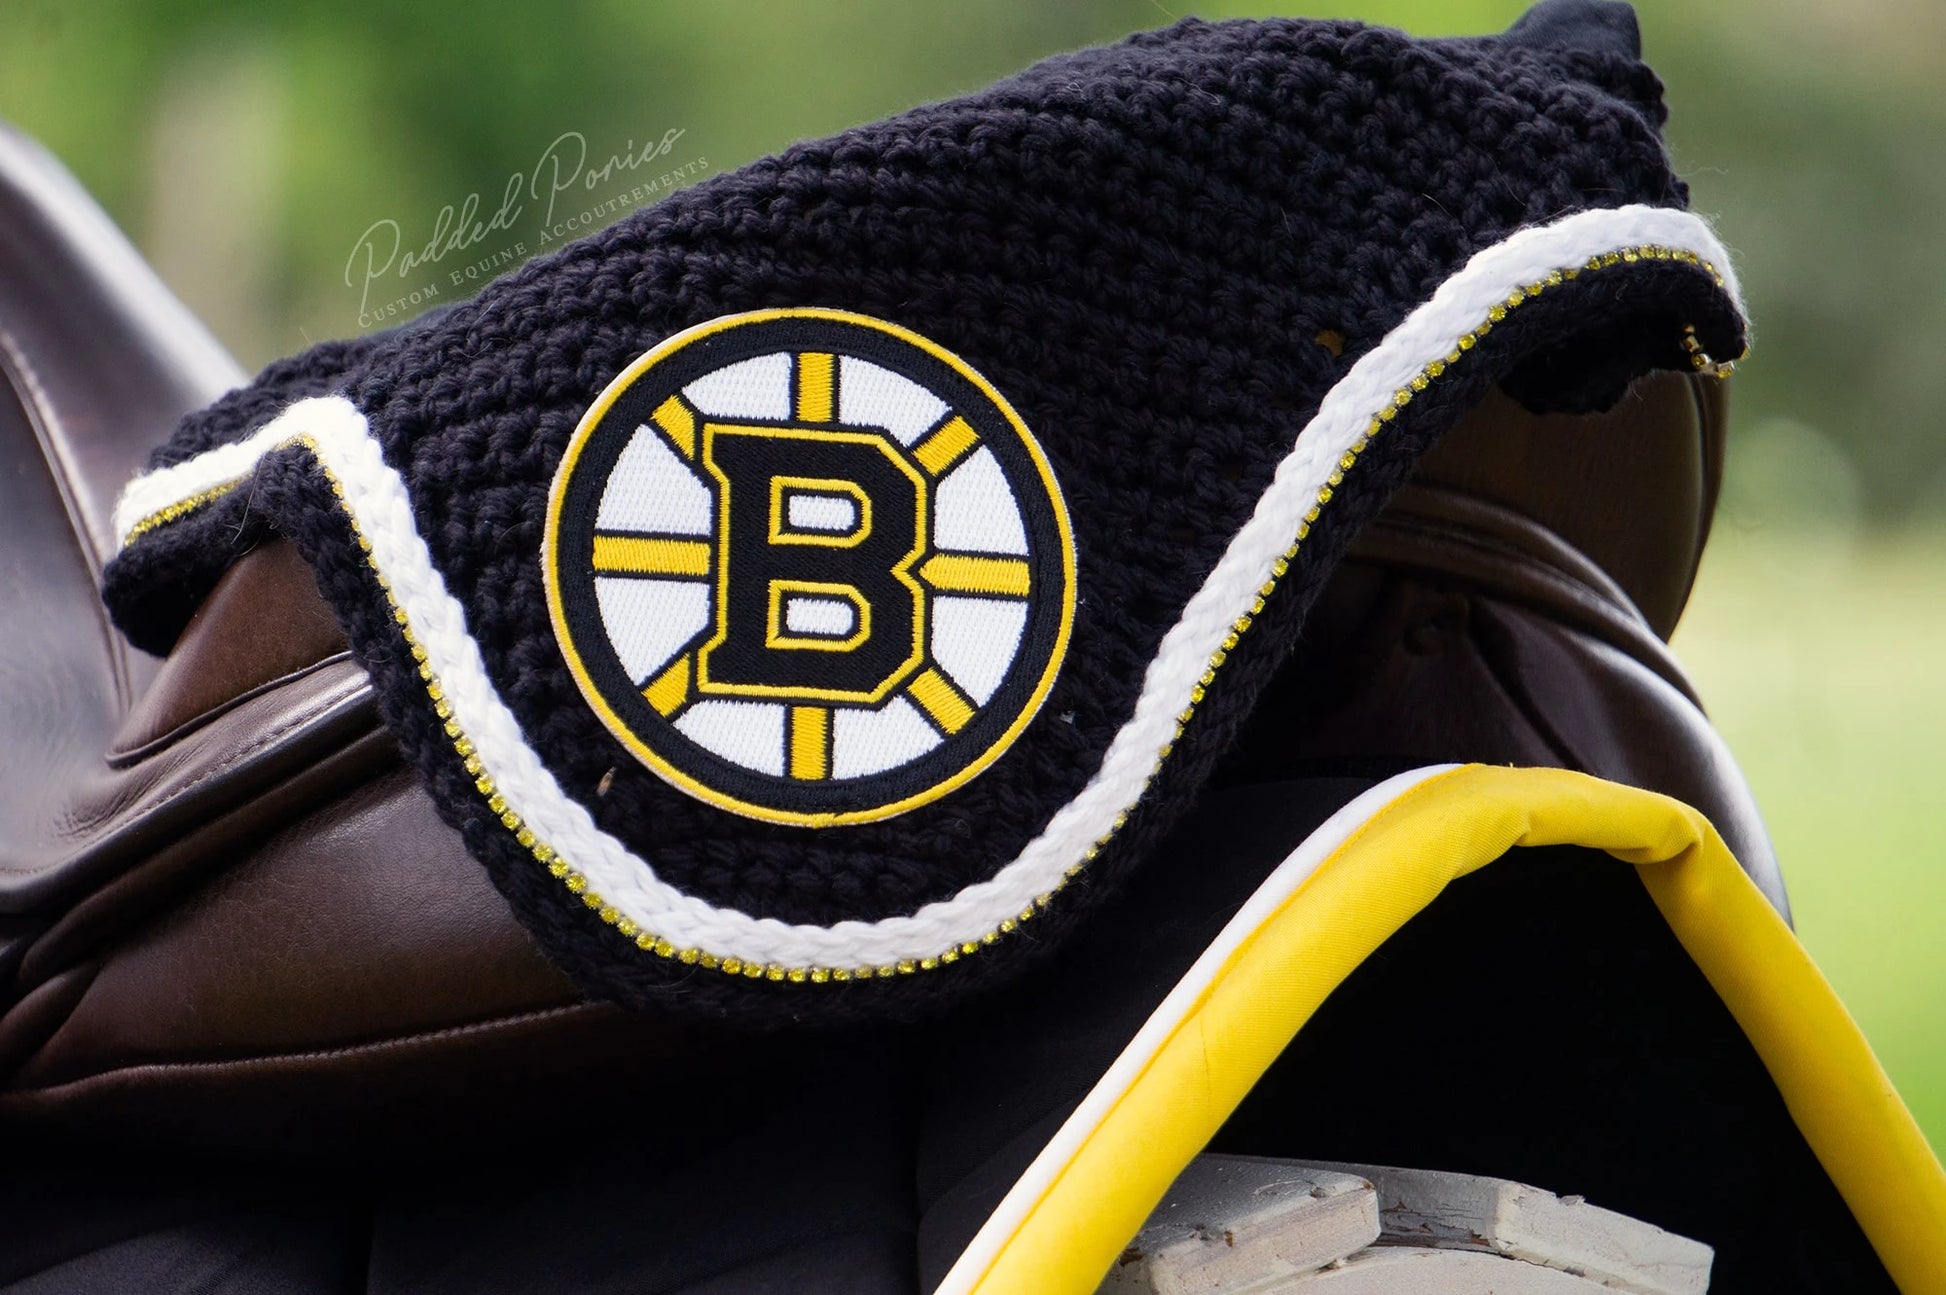 Black and Yellow Boston Bruins Hockey Patch Rhinestone Fly Veil Bonnet with Matching Saddle Pad